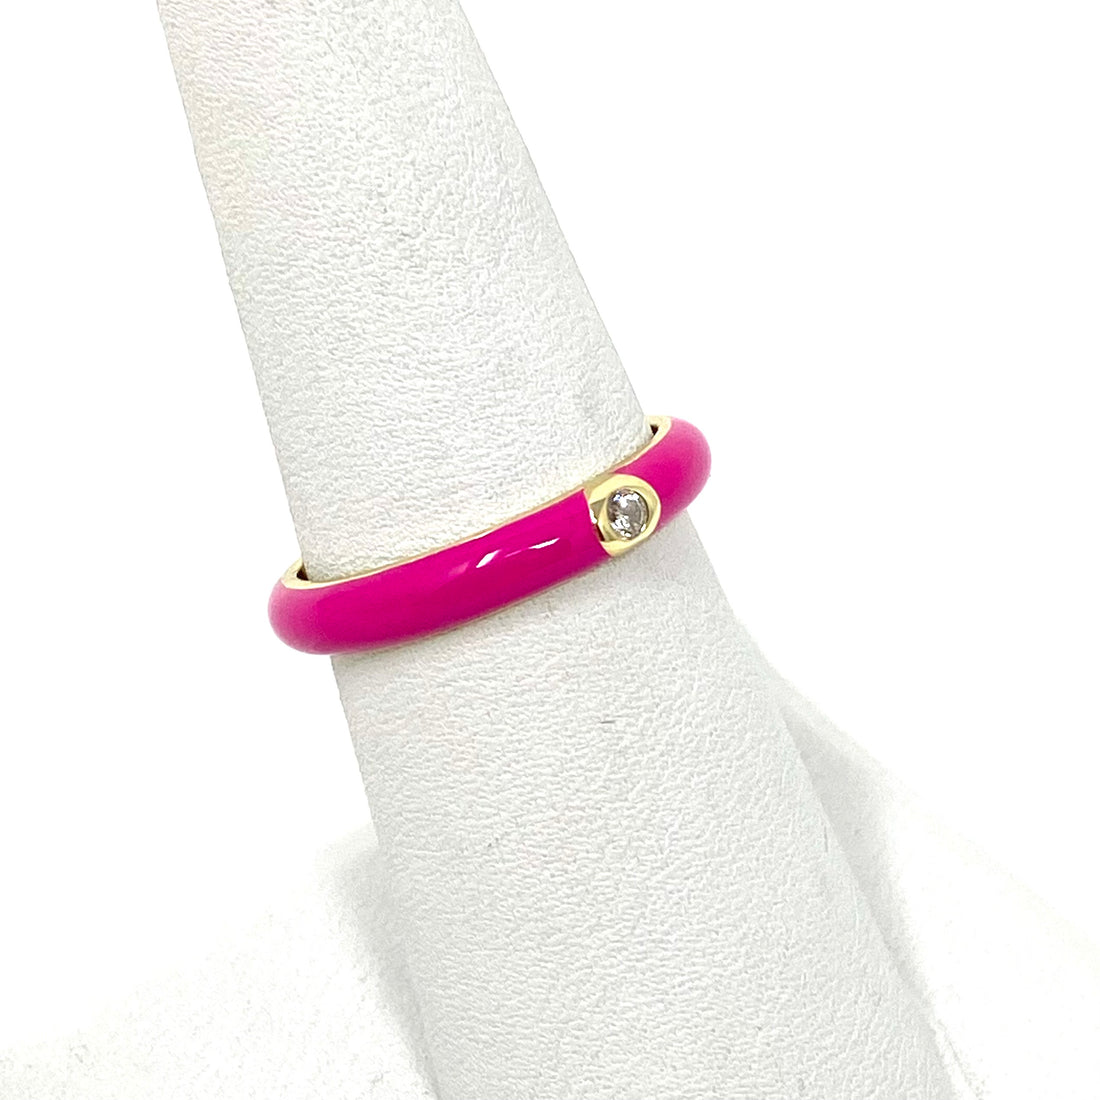 Enamel Ring with Solitaire Stone in Magenta